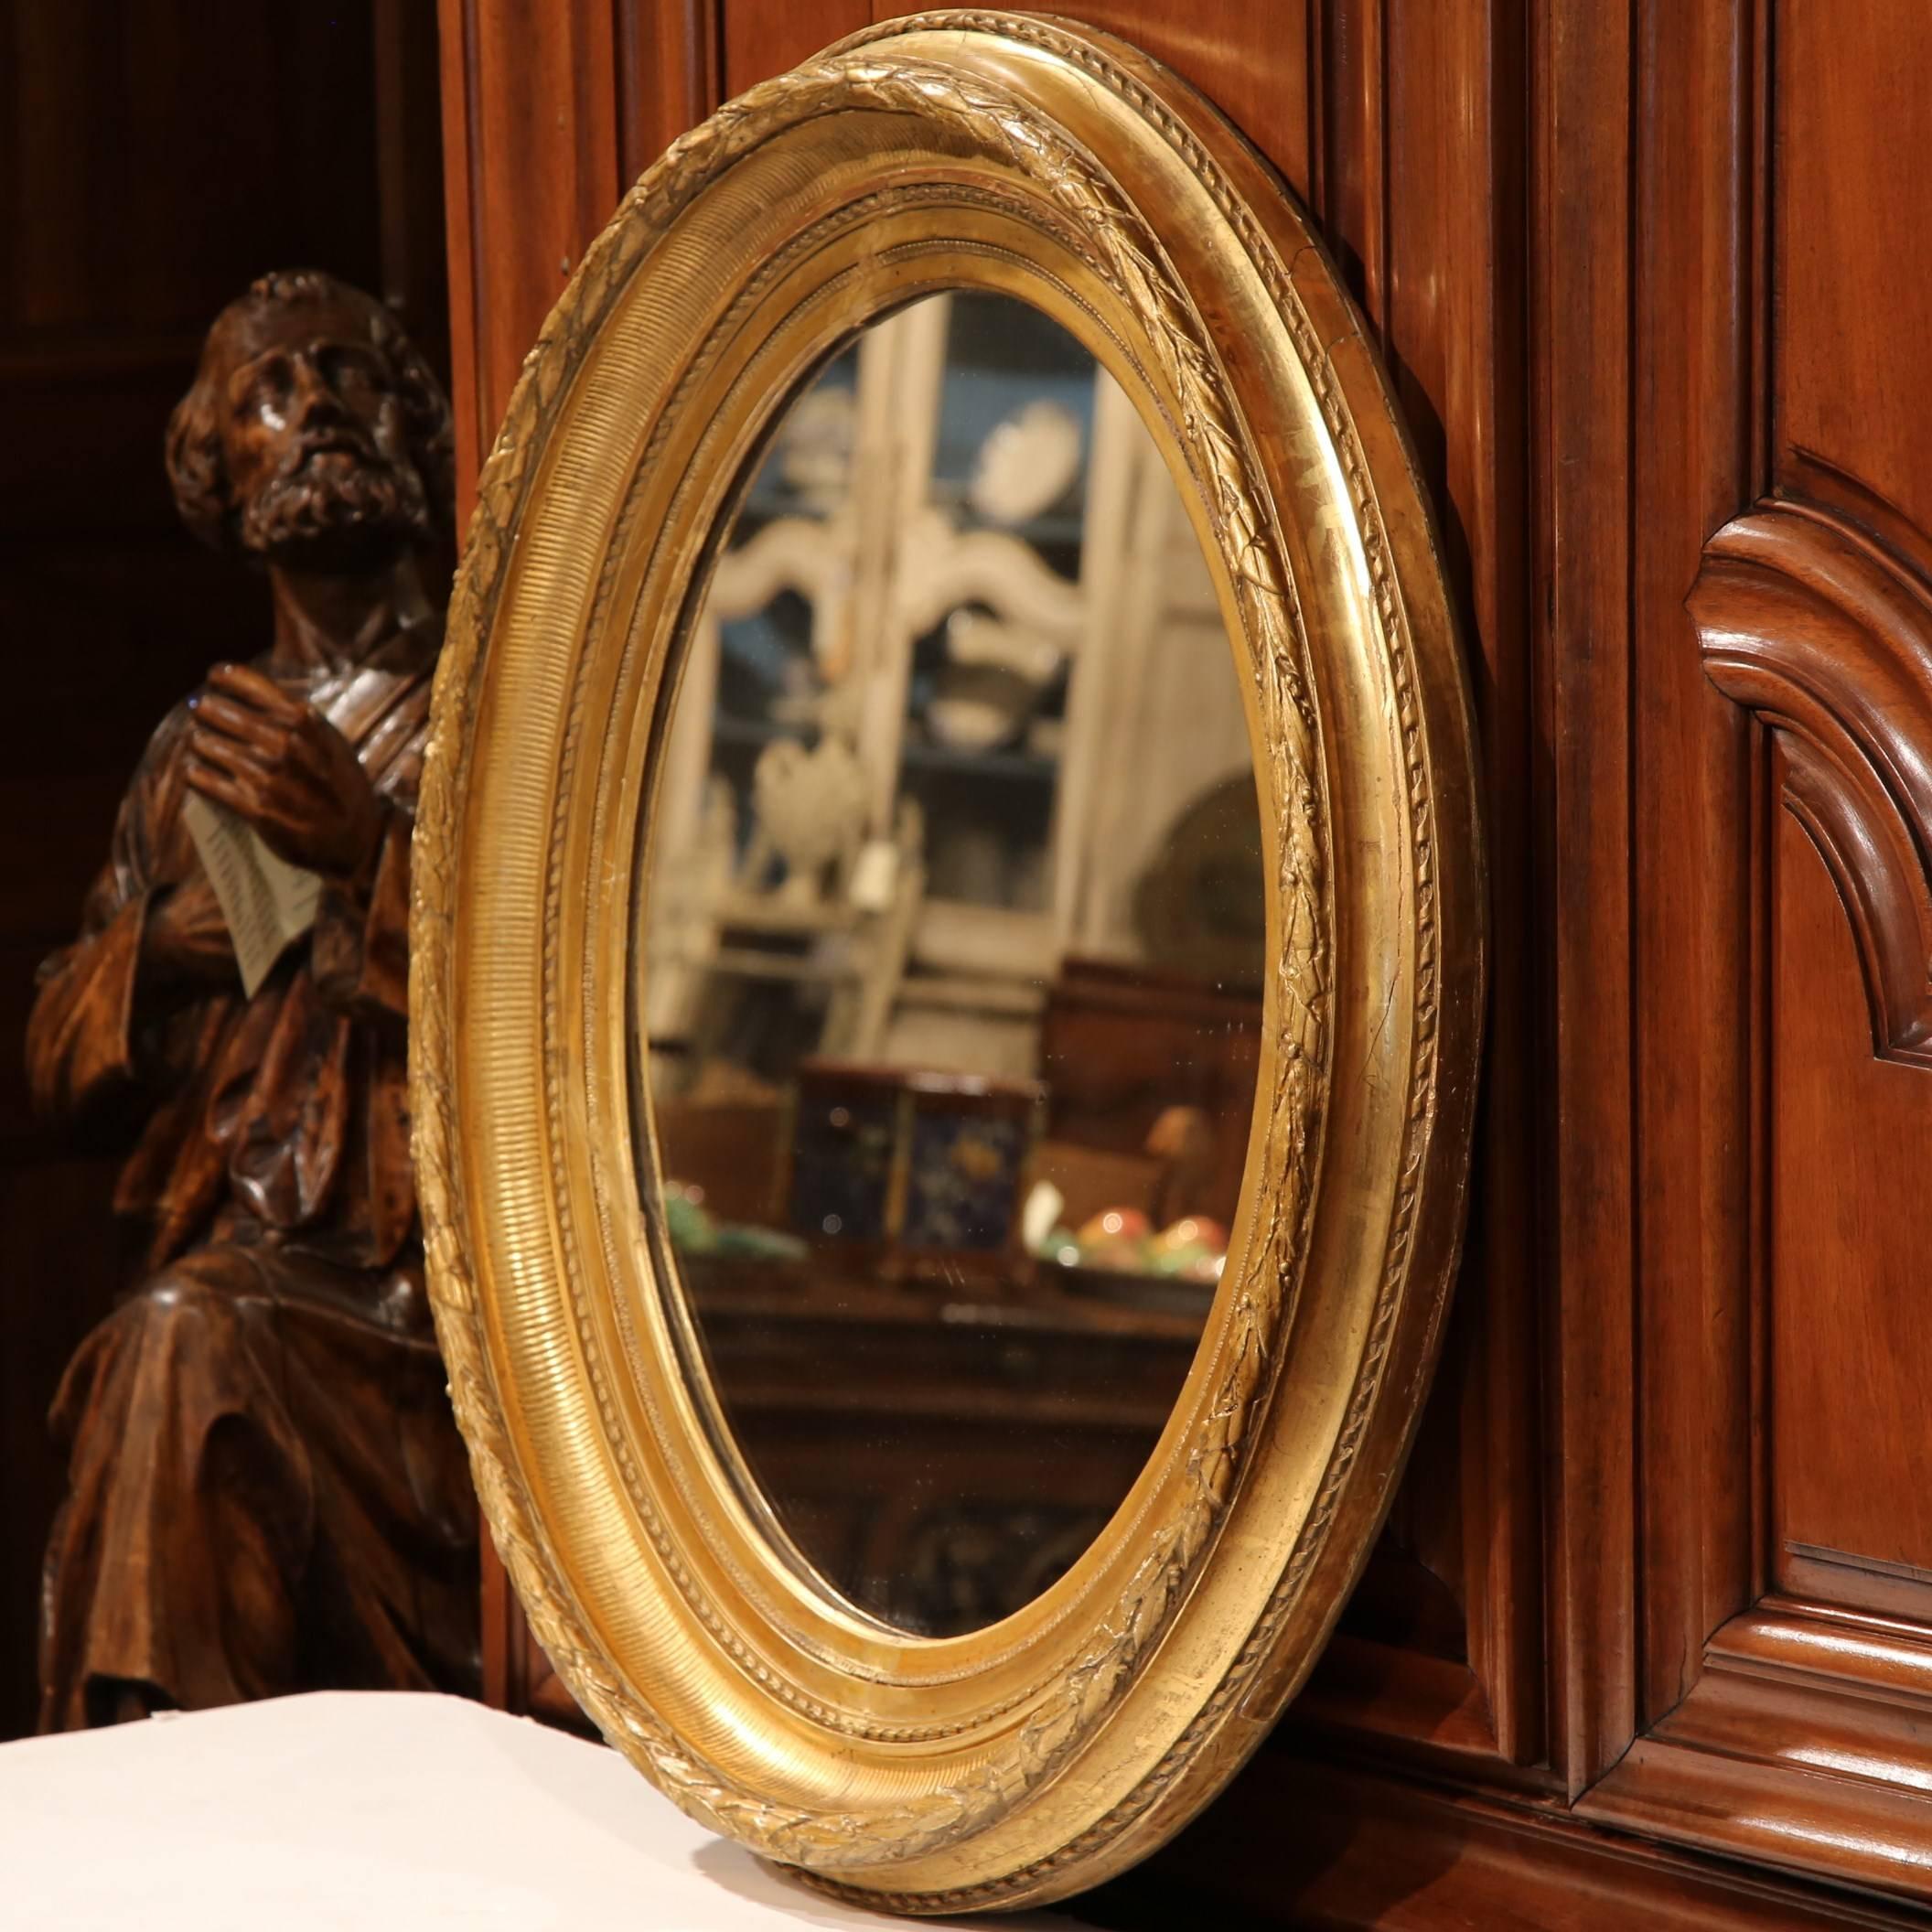 This elegant, antique carved mirror is a must-have for a home of any style from traditional to contemporary. Founded in Versailles, France, circa 1870, this oval mirror features intricate carvings around the frame with Classic motifs and is